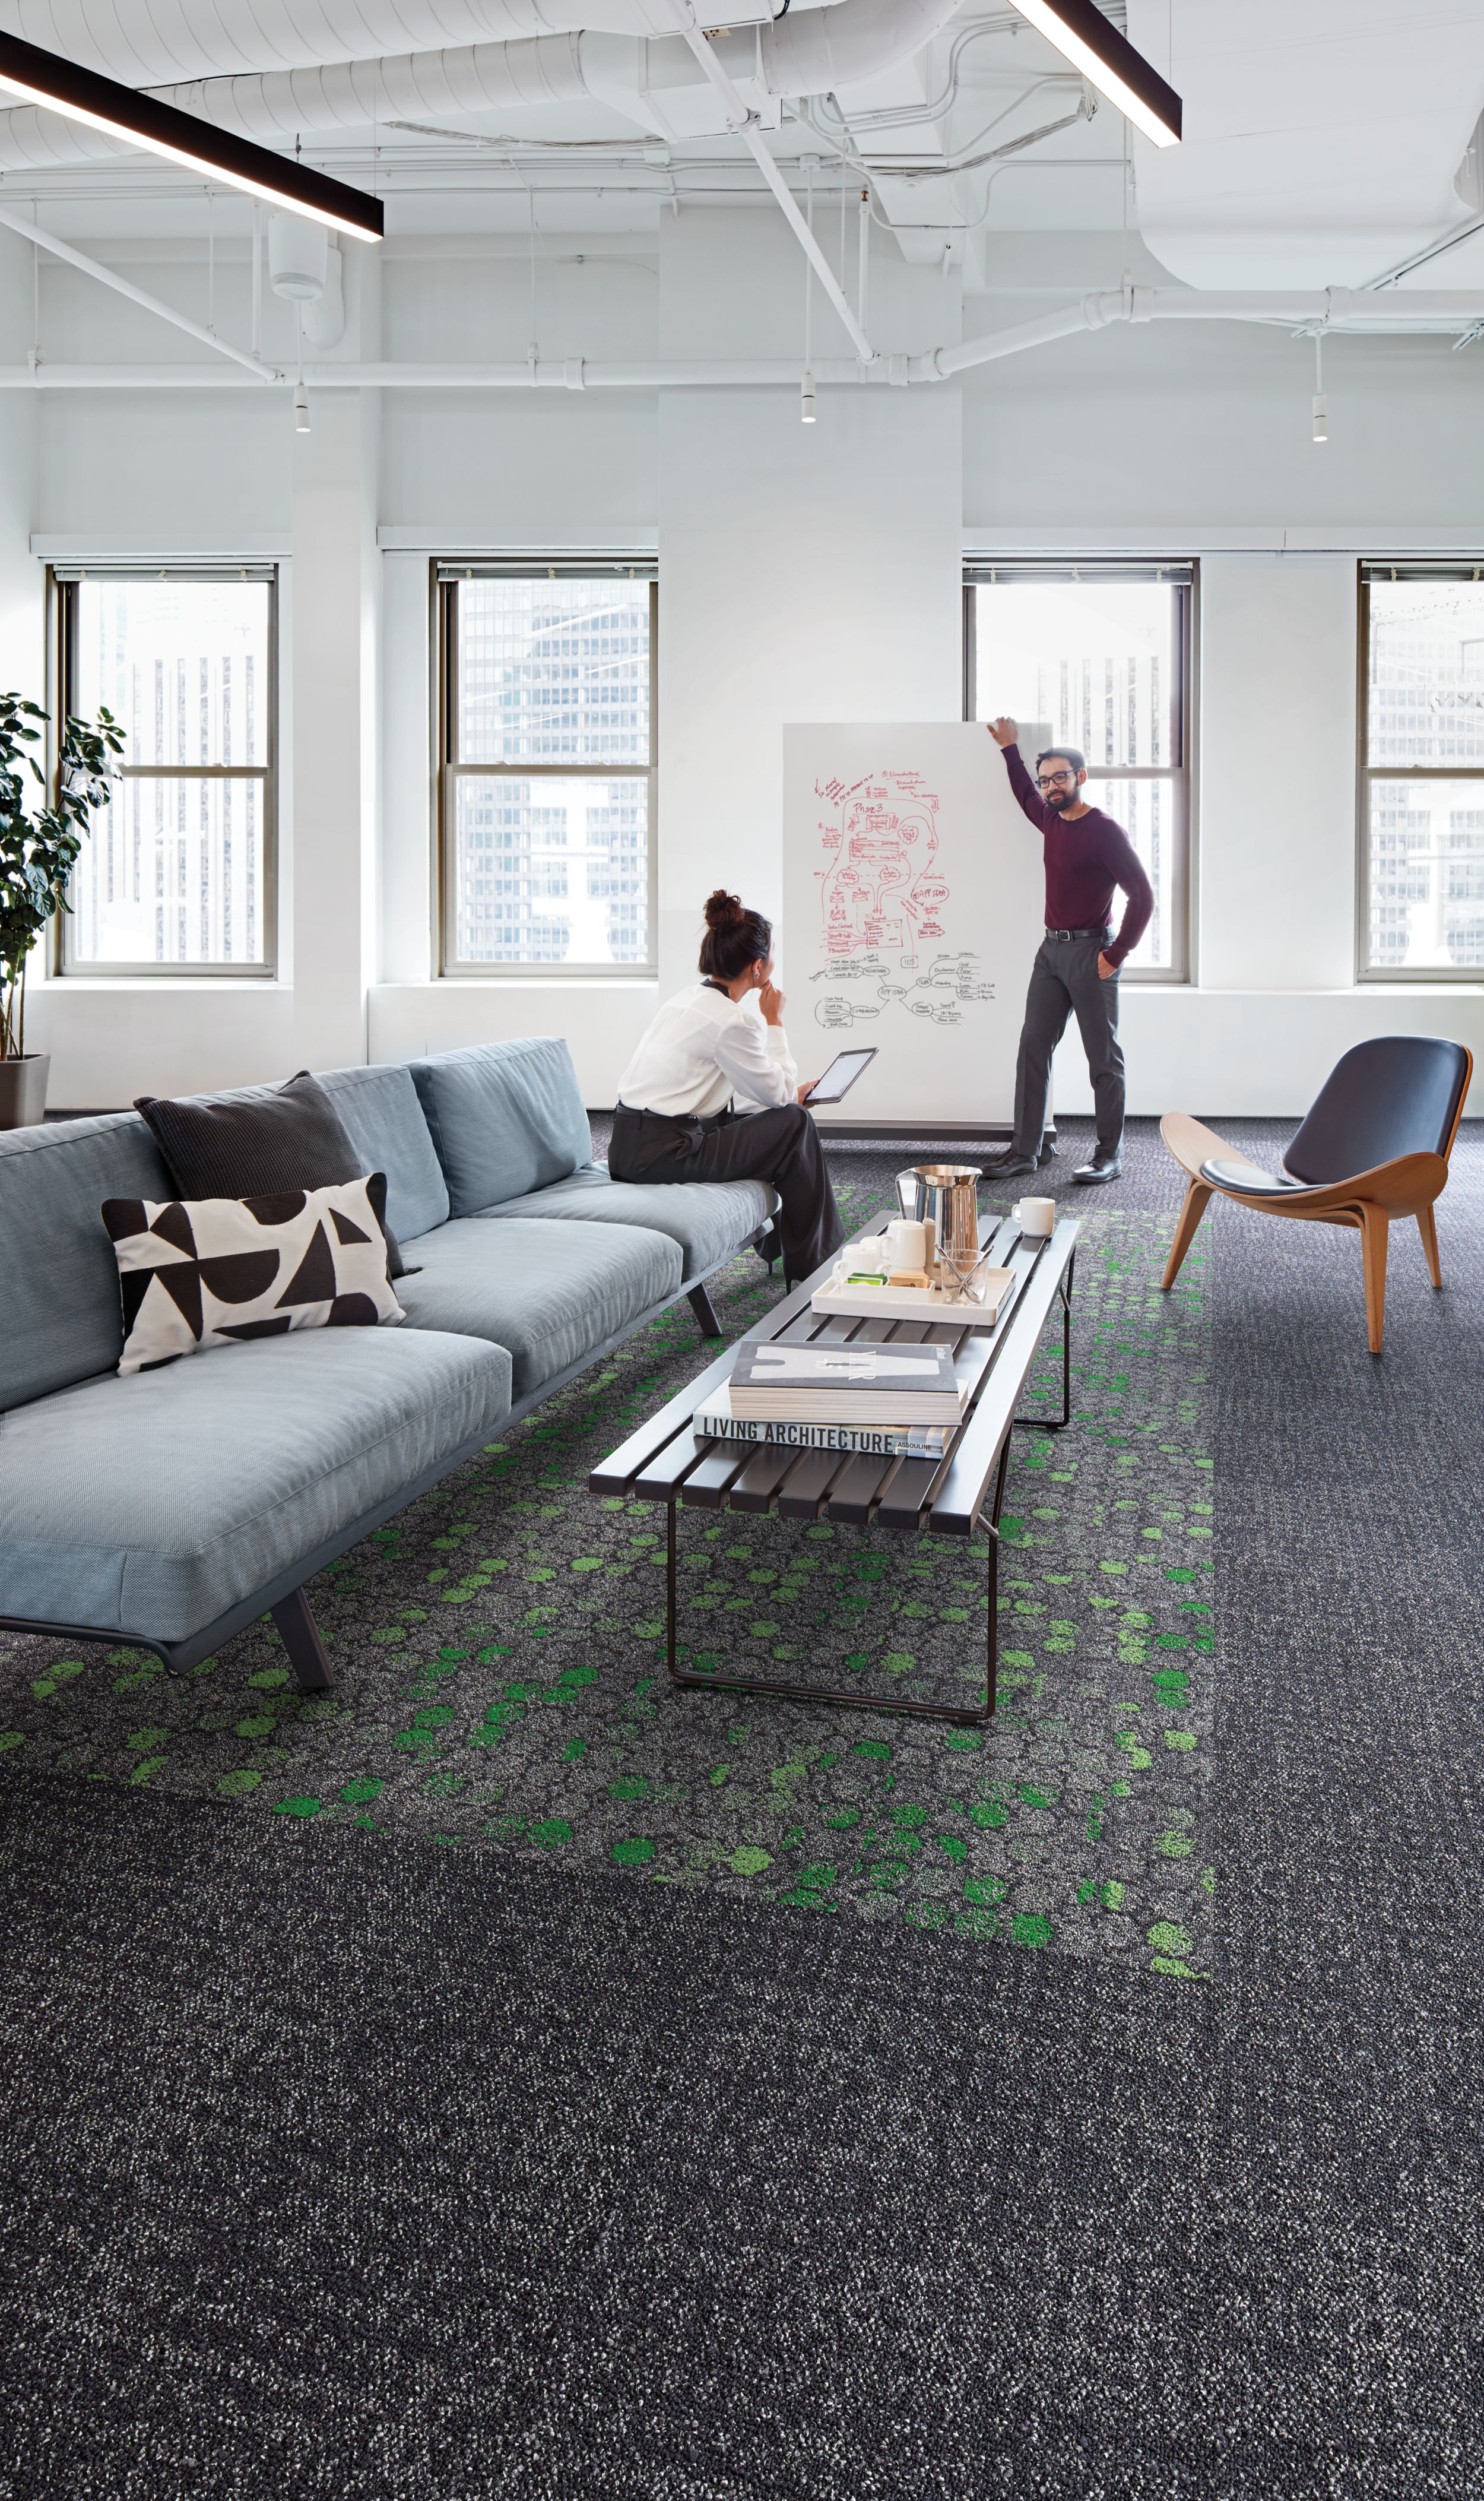 Interface Broome Street and Wheler Street in open office area with people afbeeldingnummer 14